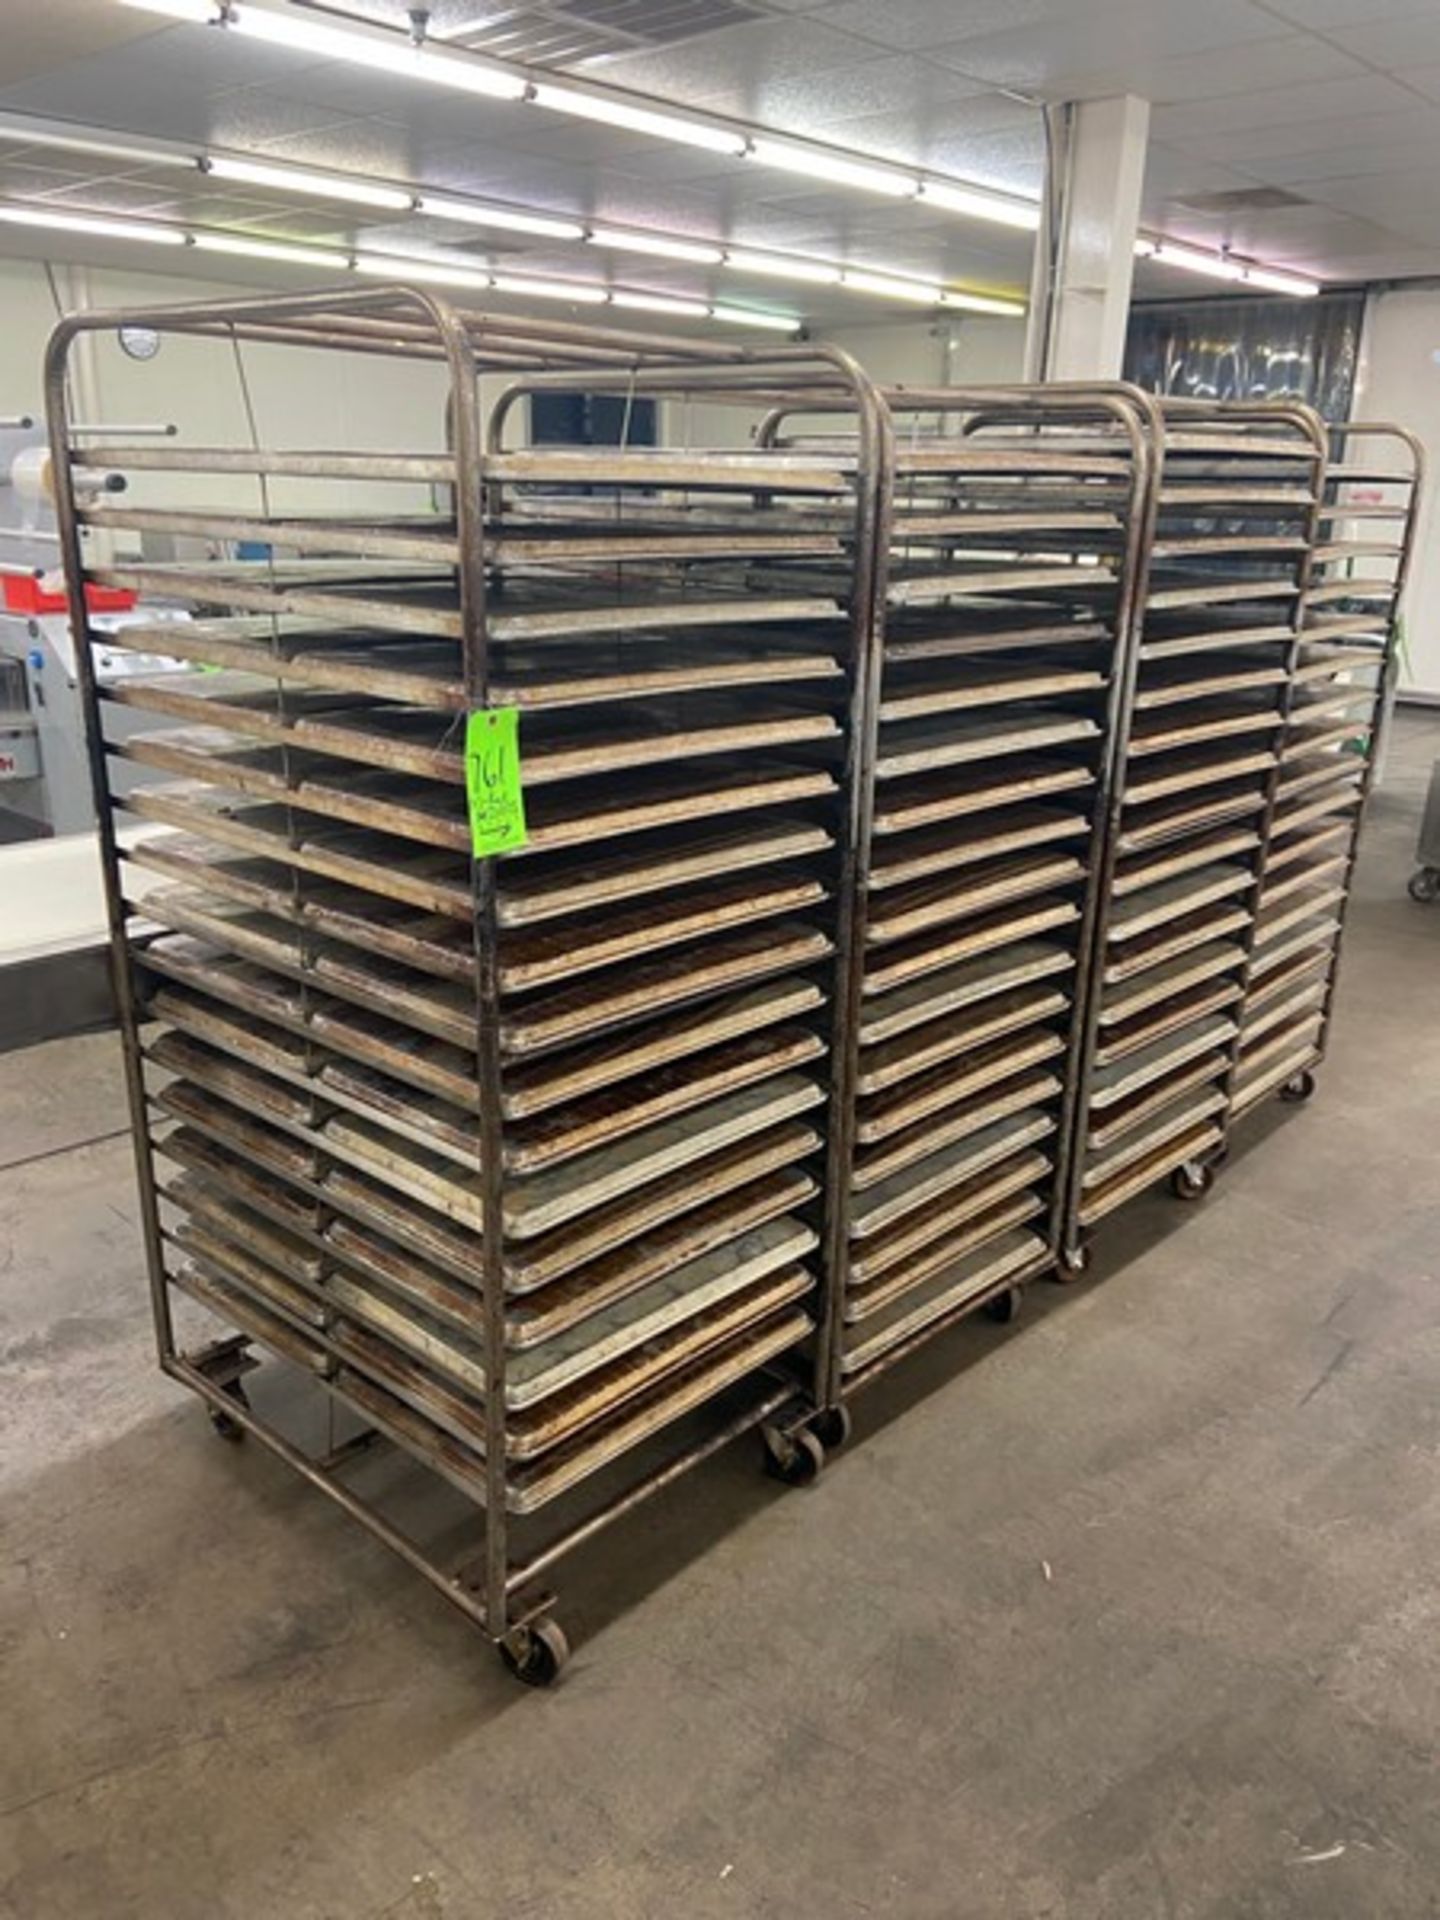 (4) PORTABLE DOUBLE SIDED BAKING PAN RACKS, MOUNTED ON CASTERS (LOCATED IN HERMITAGE, PA)